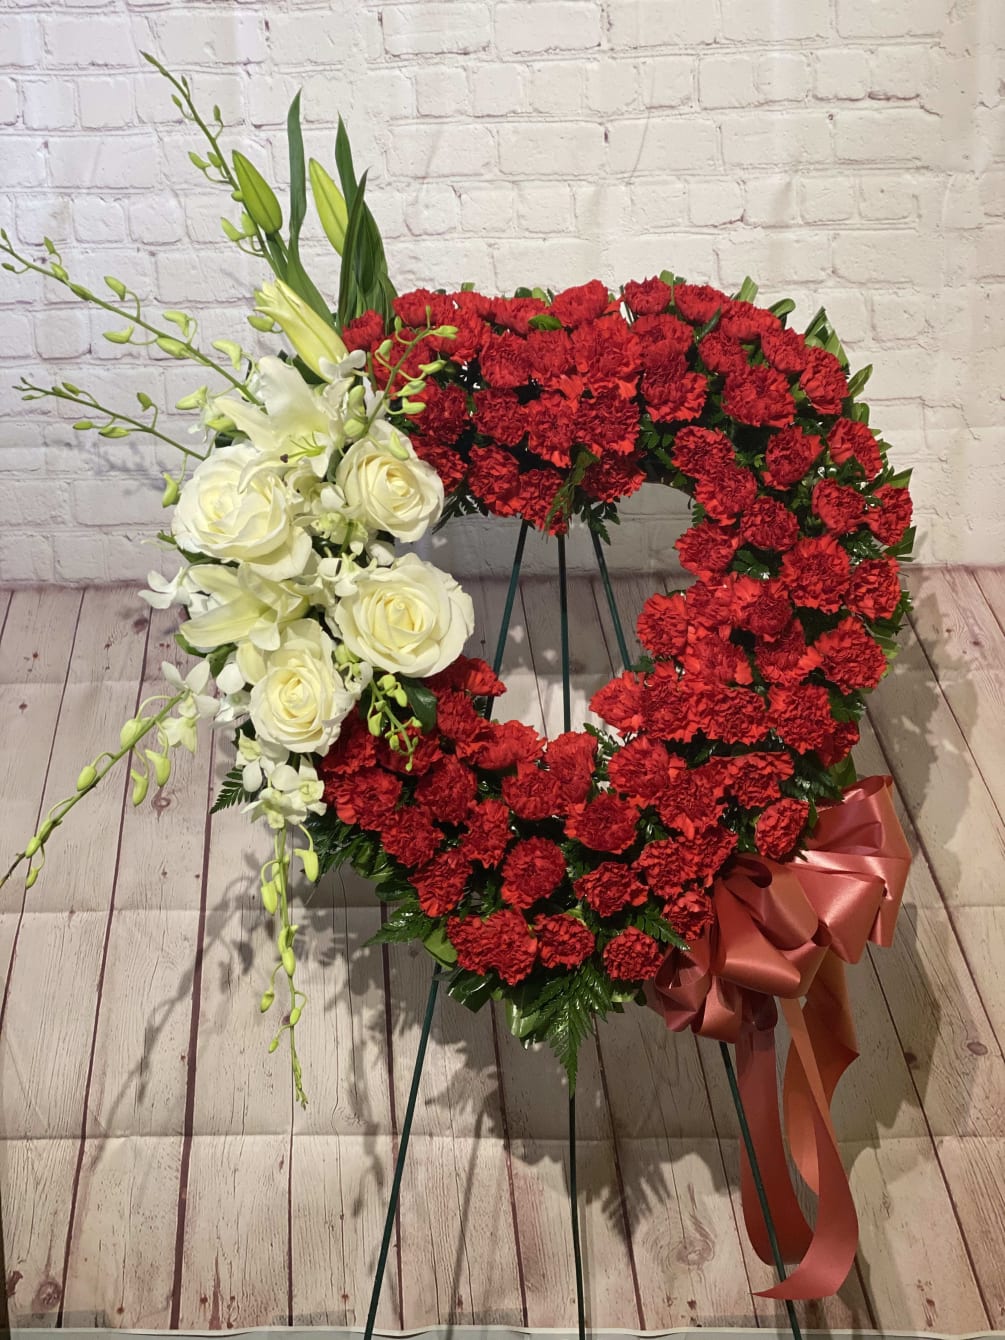 Large red open heart with white dendrobium orchids and white roses in